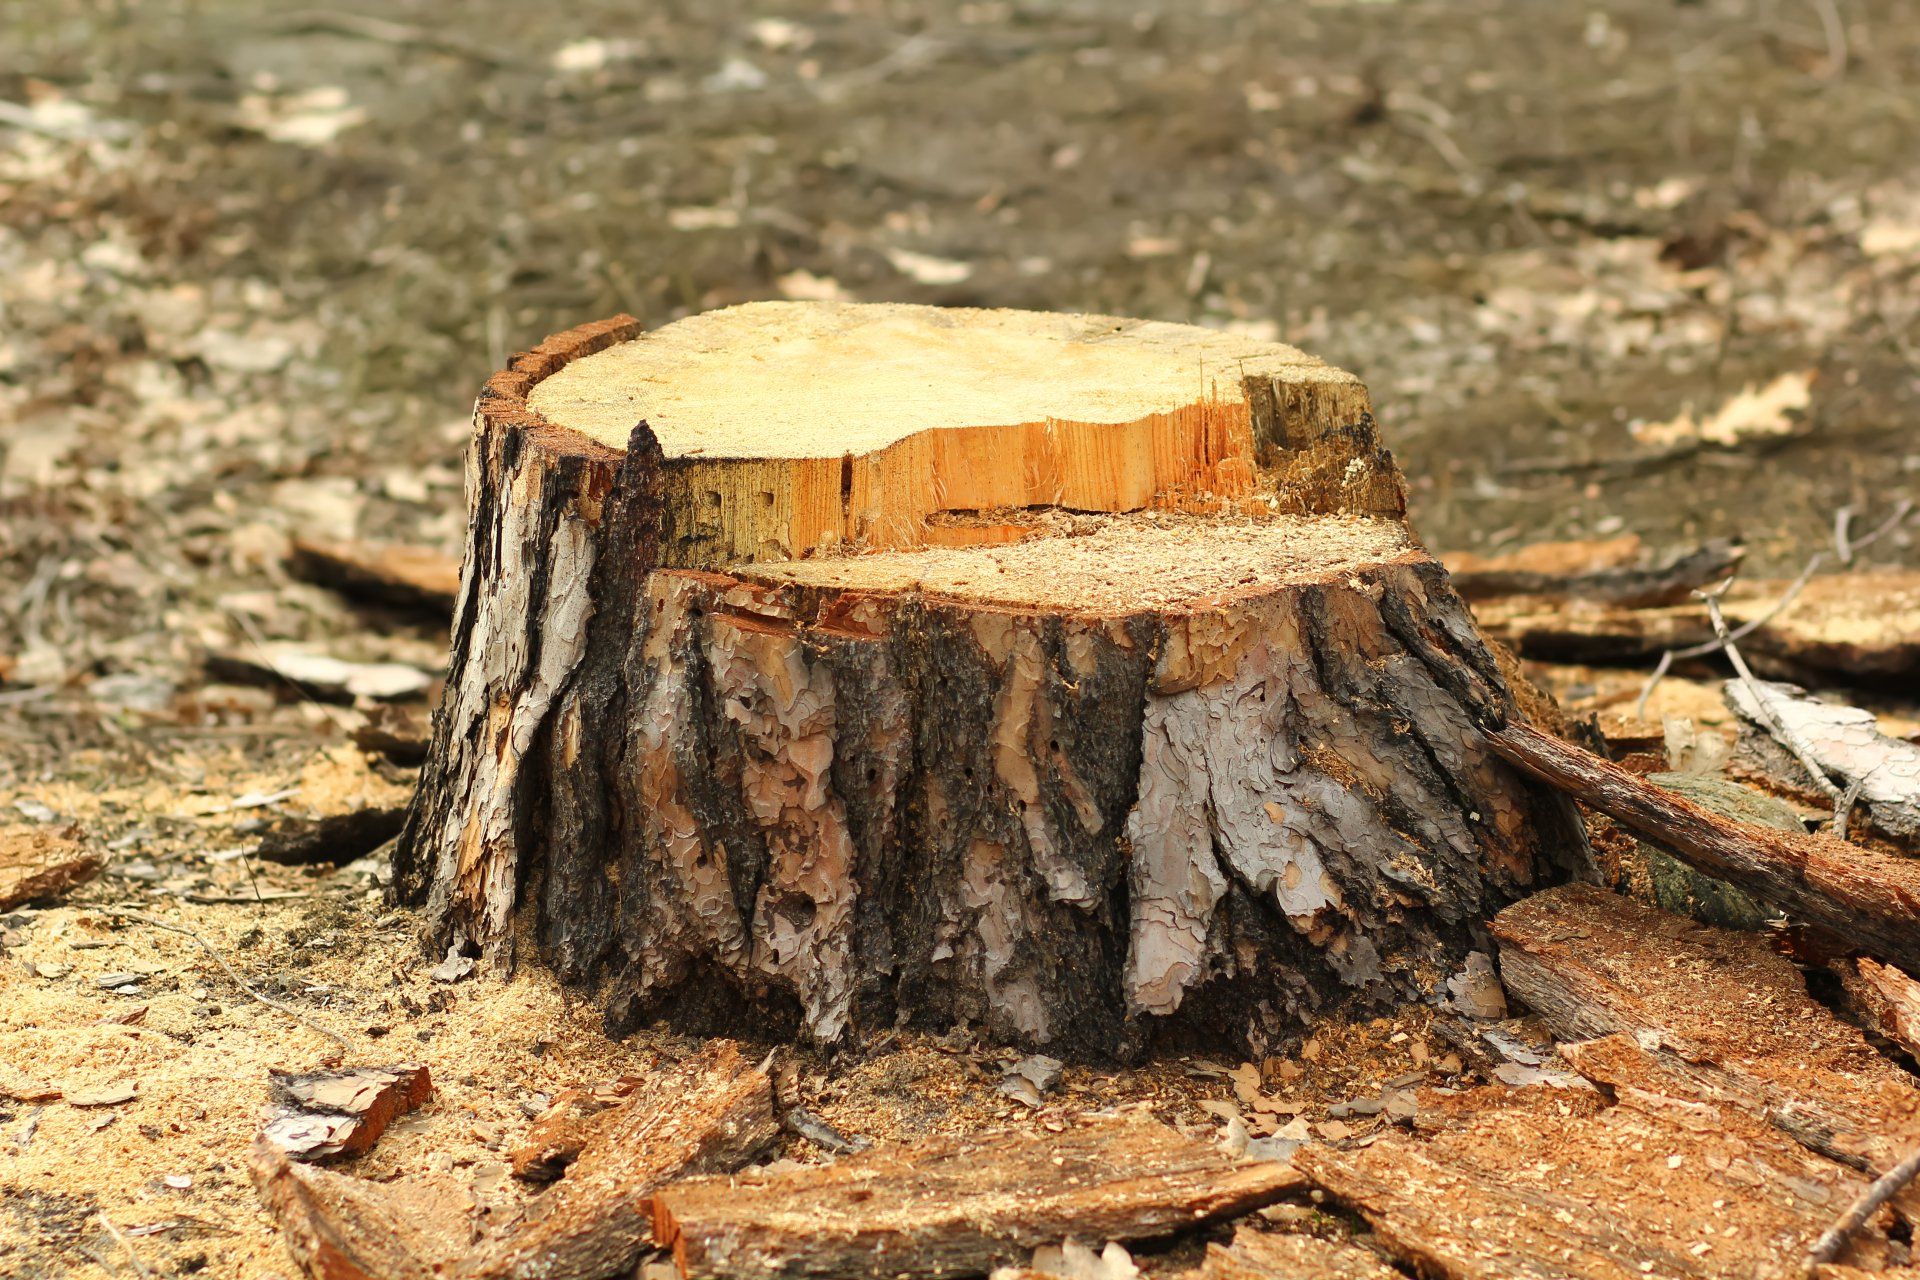 Stump after a freshly cut pine tree, forestry